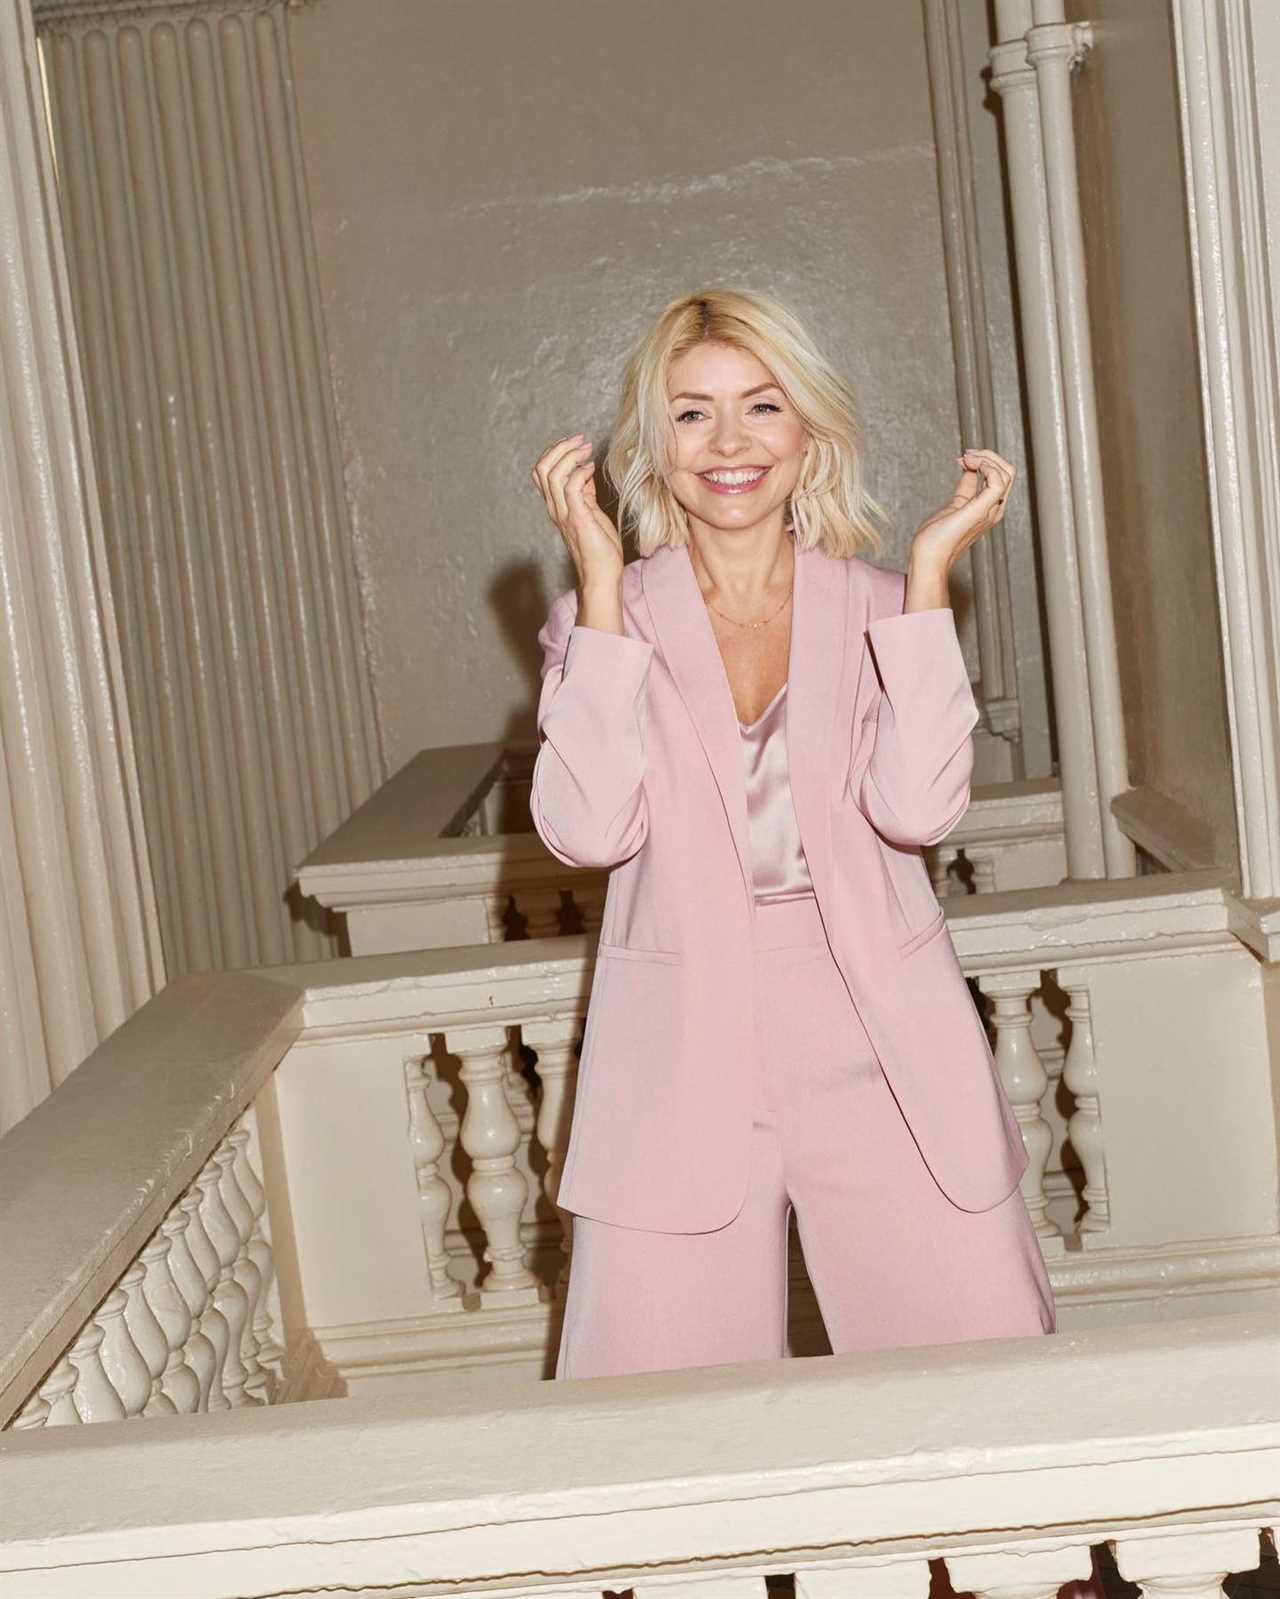 Holly Willoughby ignores Phillip Schofield drama and is all smiles in latest Marks and Spencer modelling campaign